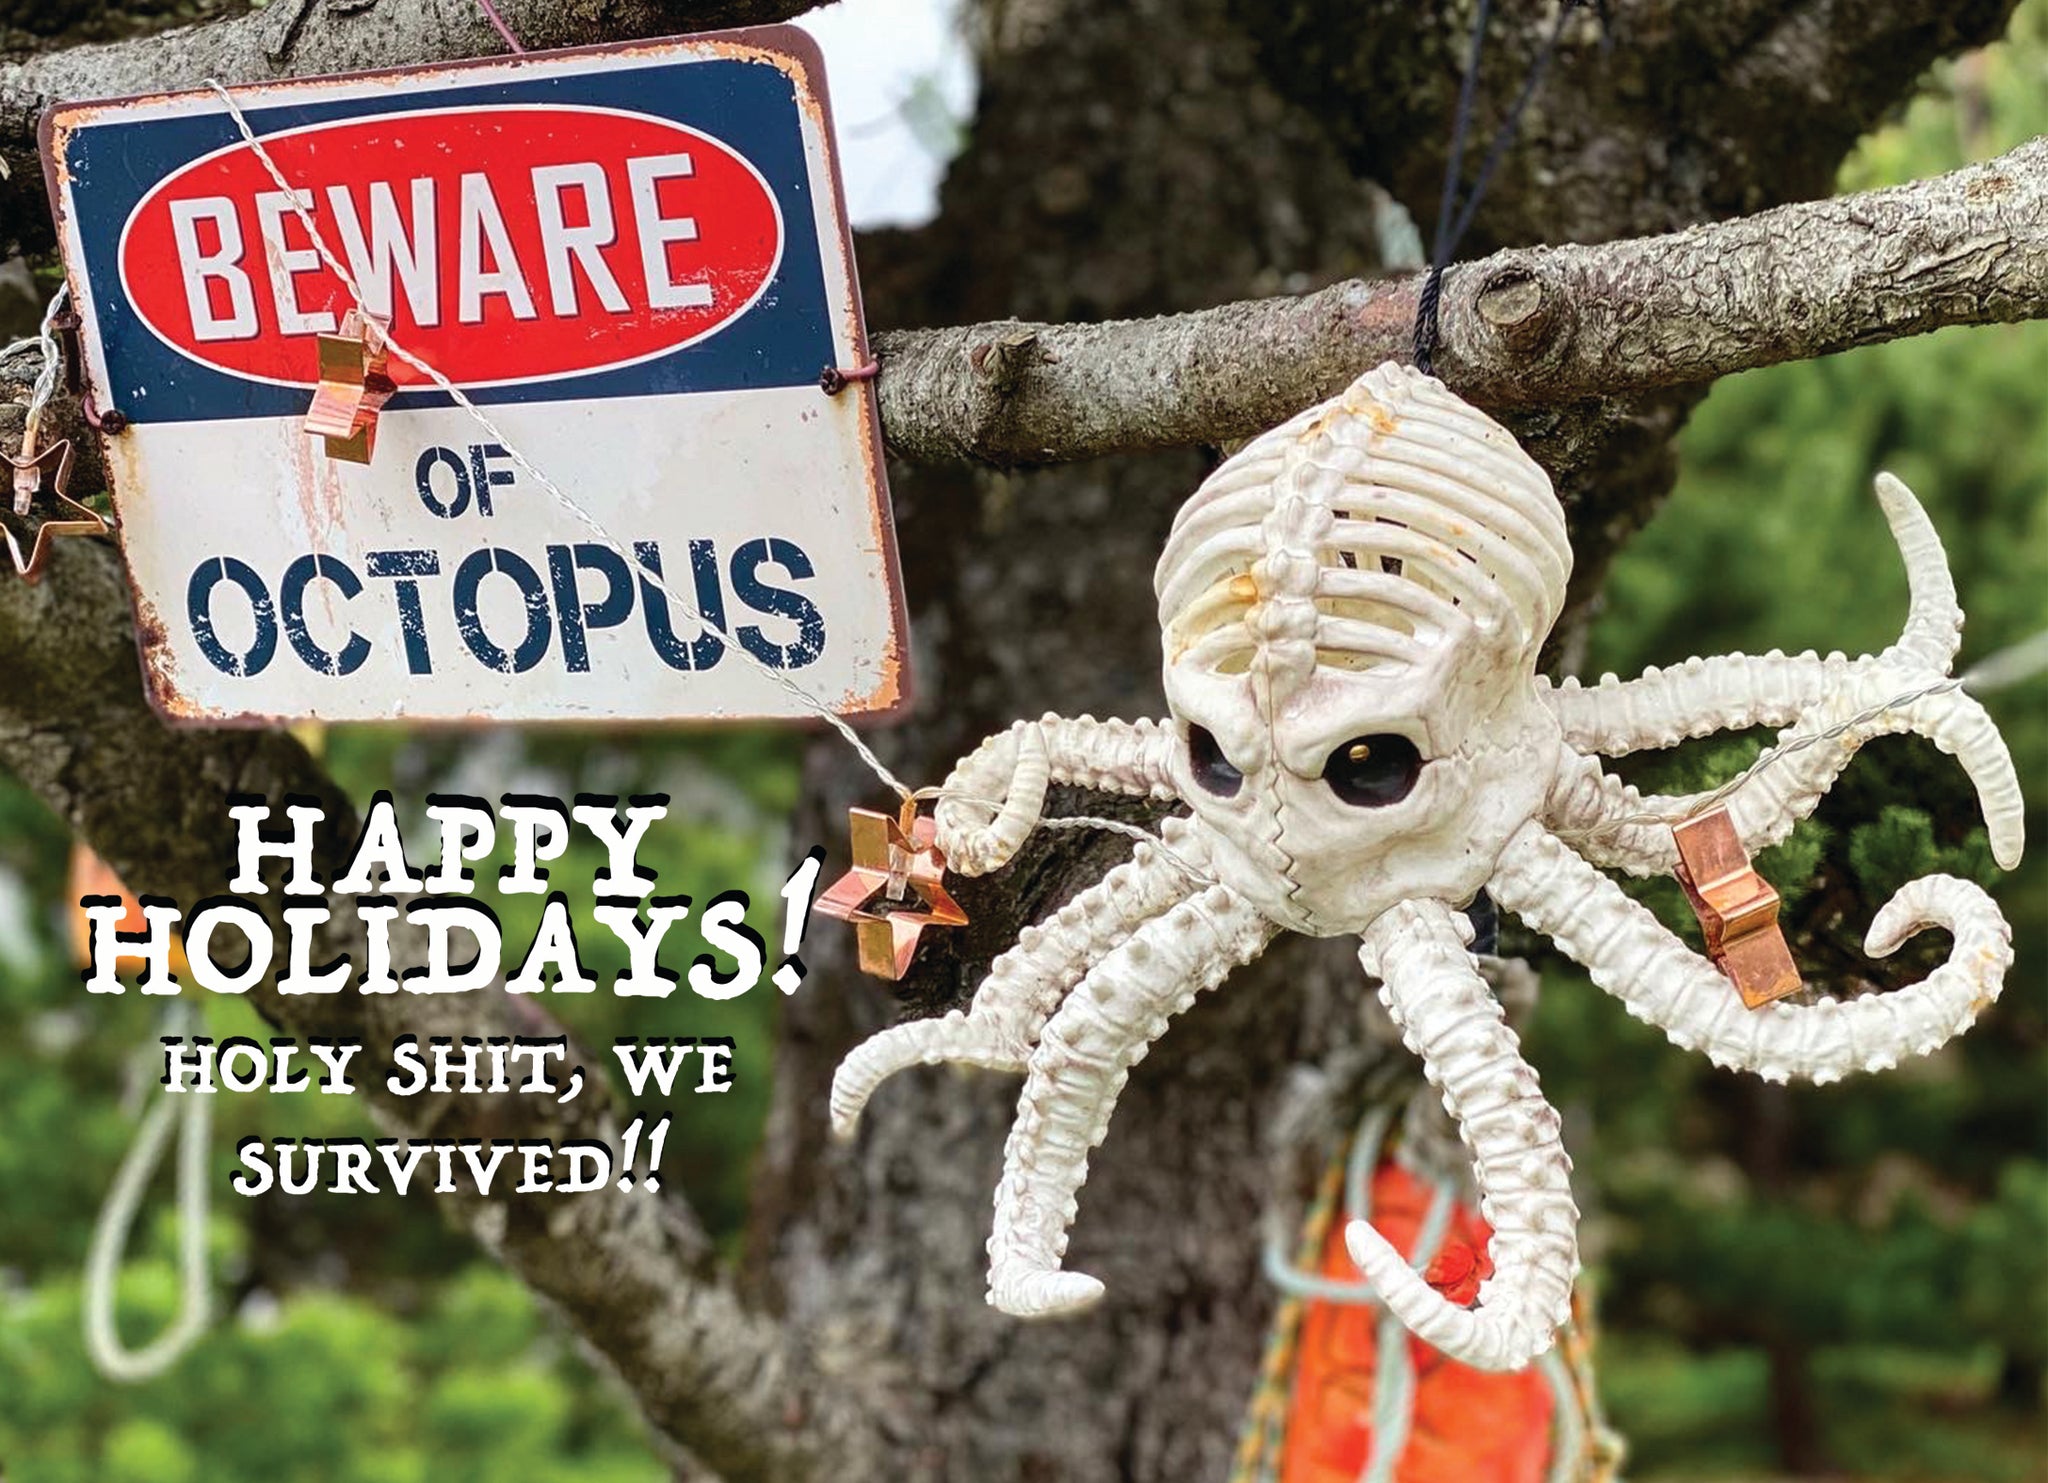 We Survived! *Limited Edition* Funny Holiday Greeting Card